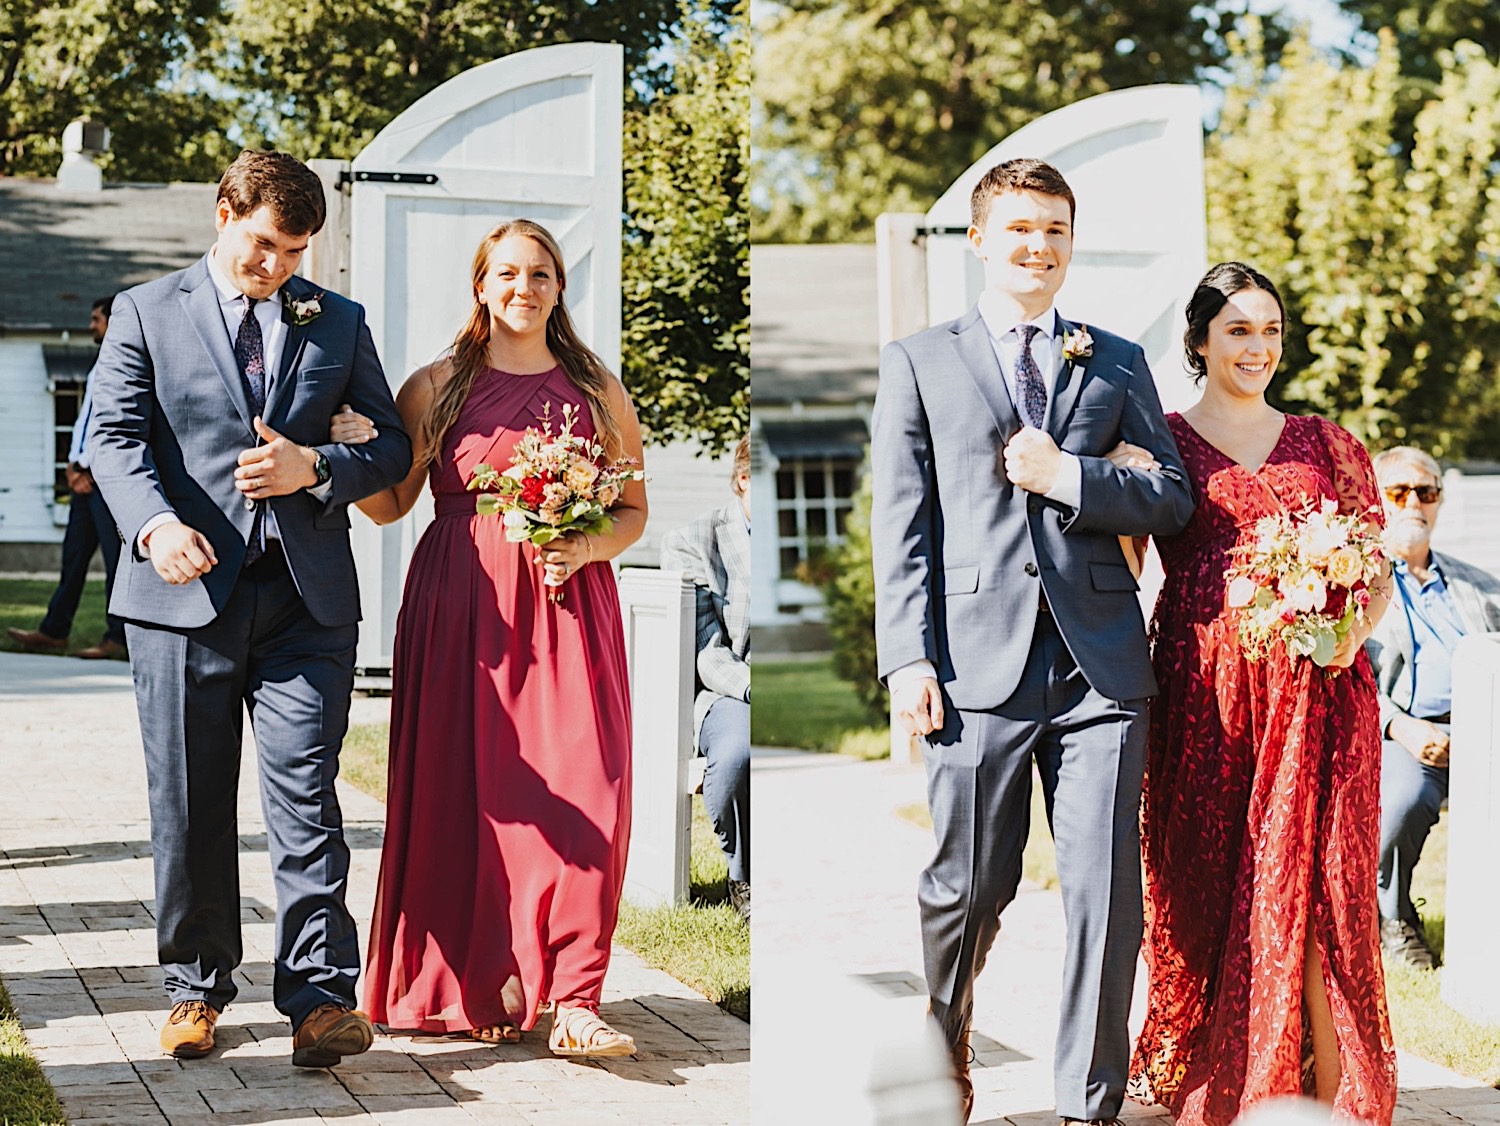 2 photos side by side of bridesmaids and groomsmen walking arm in arm down the aisle of an outdoor wedding ceremony together